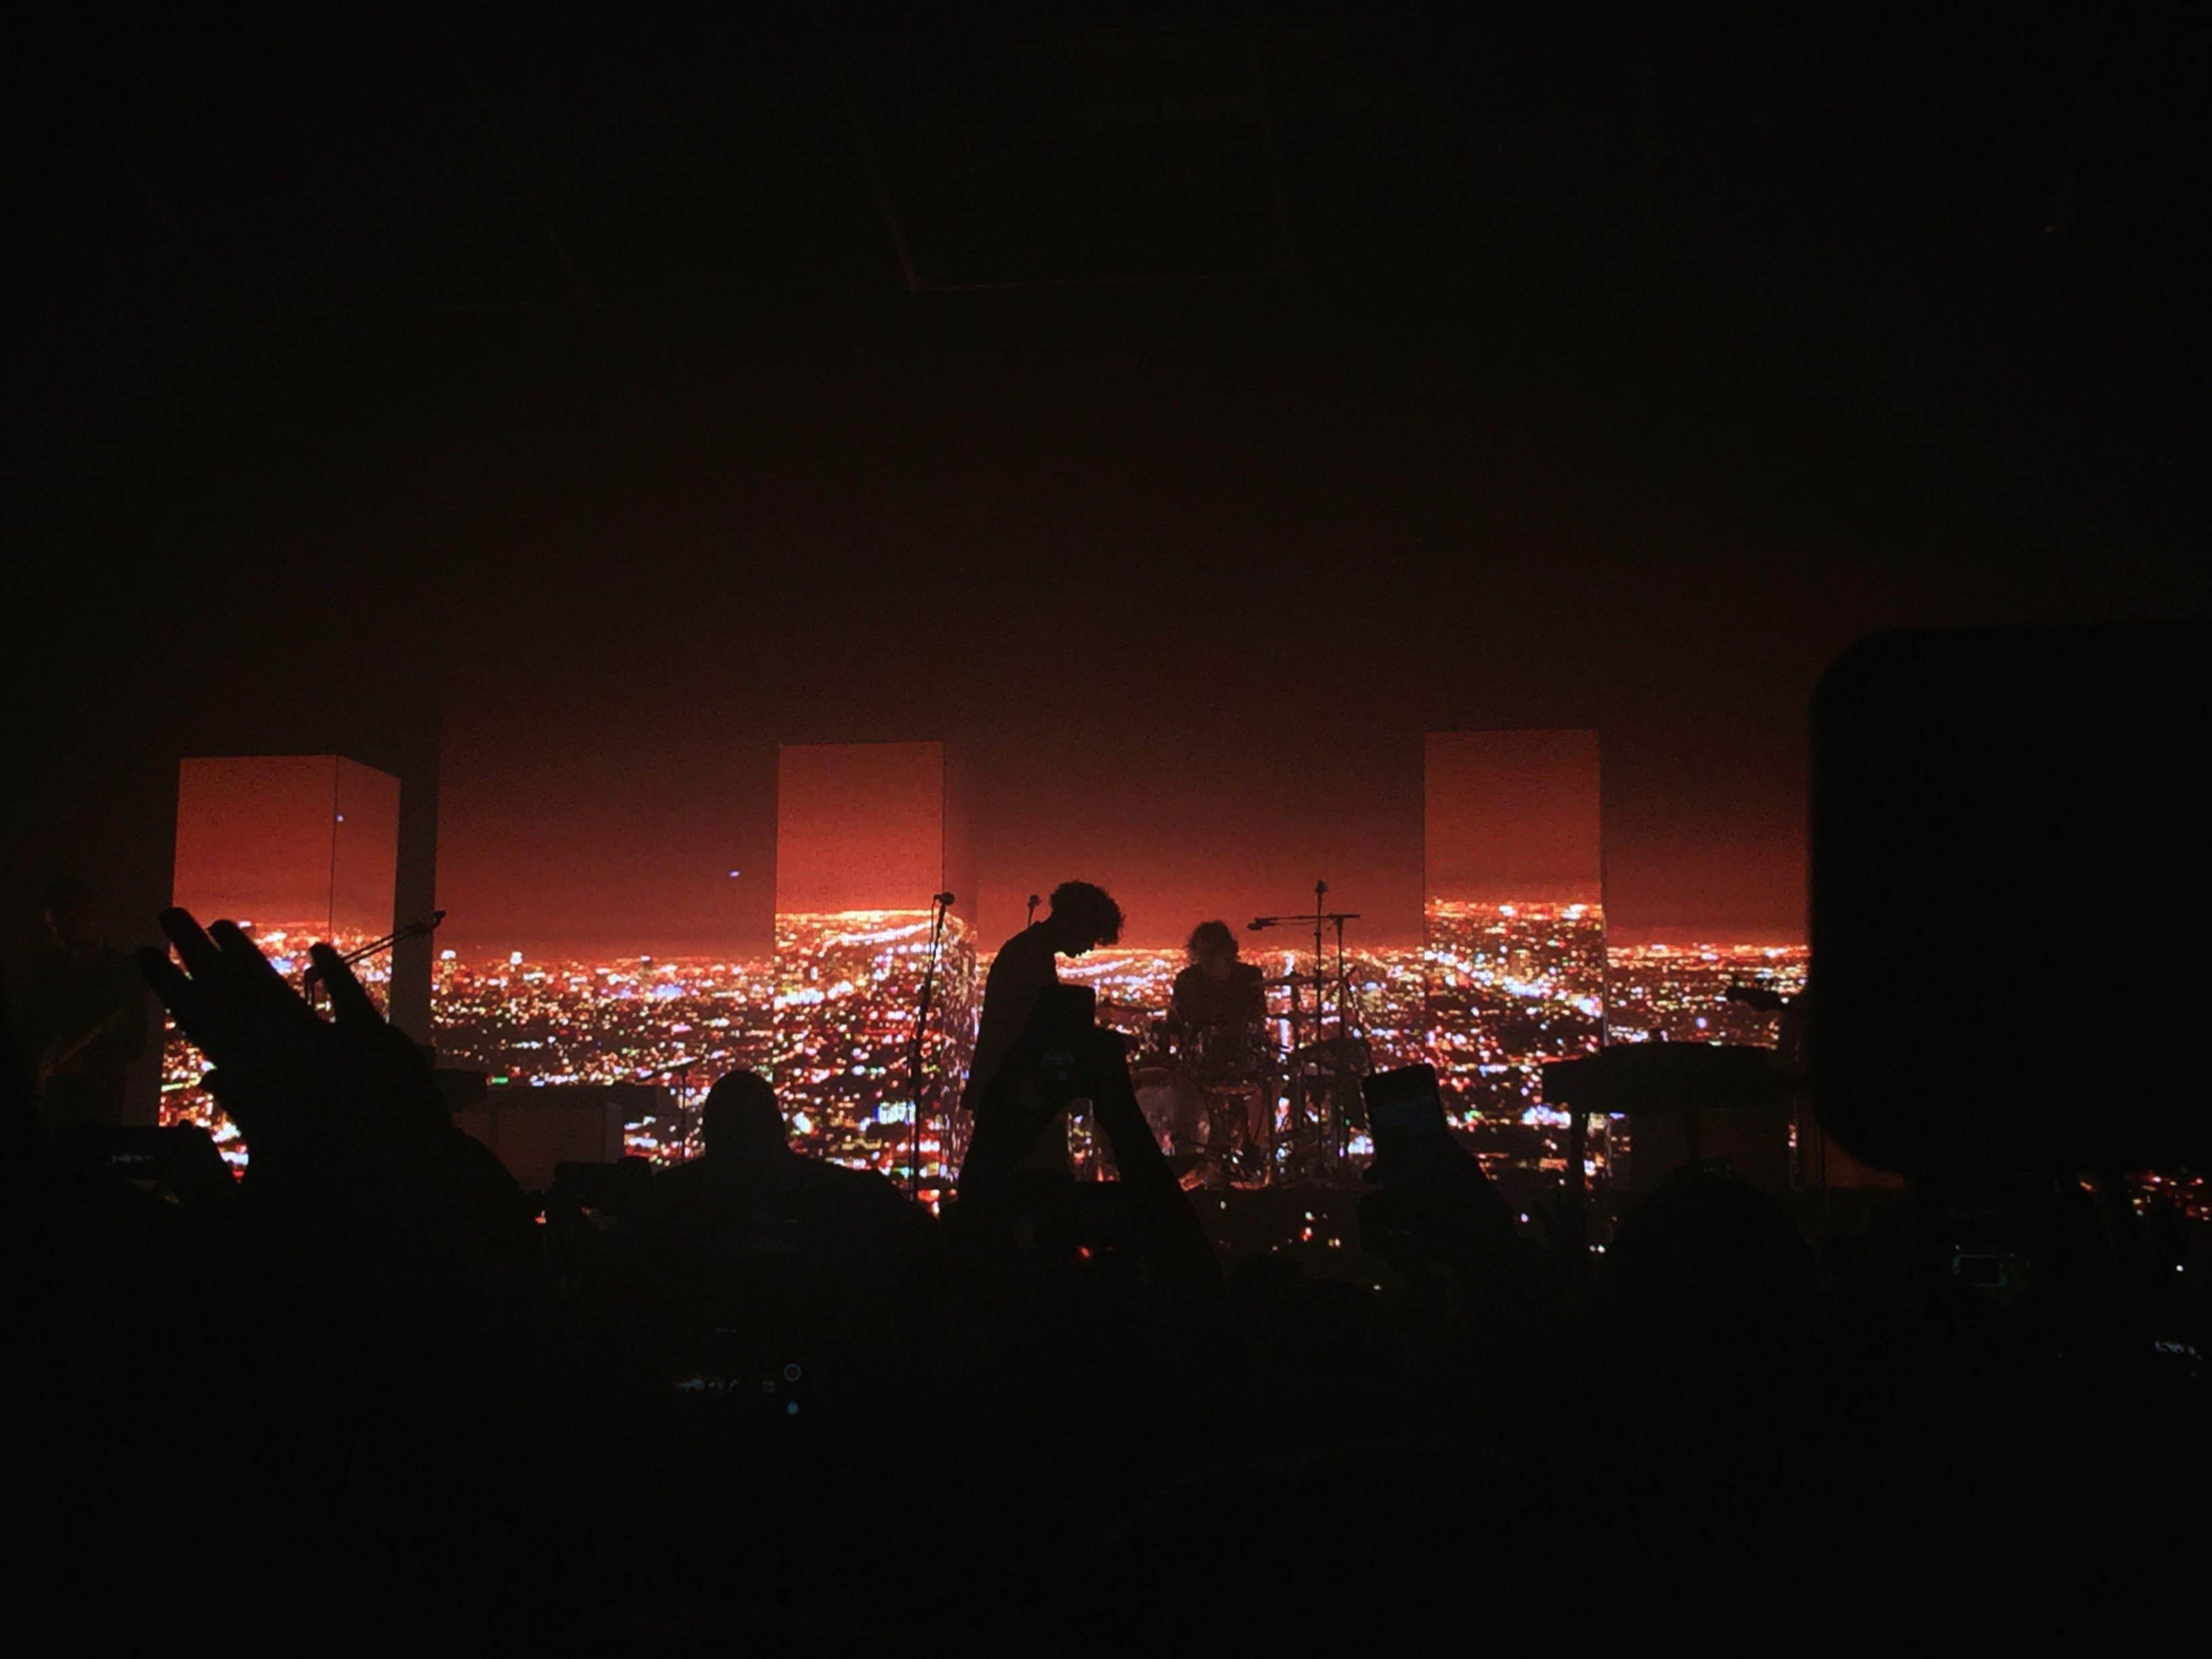 Dark concert venue with silhouetted audience and band in front of red cityscape